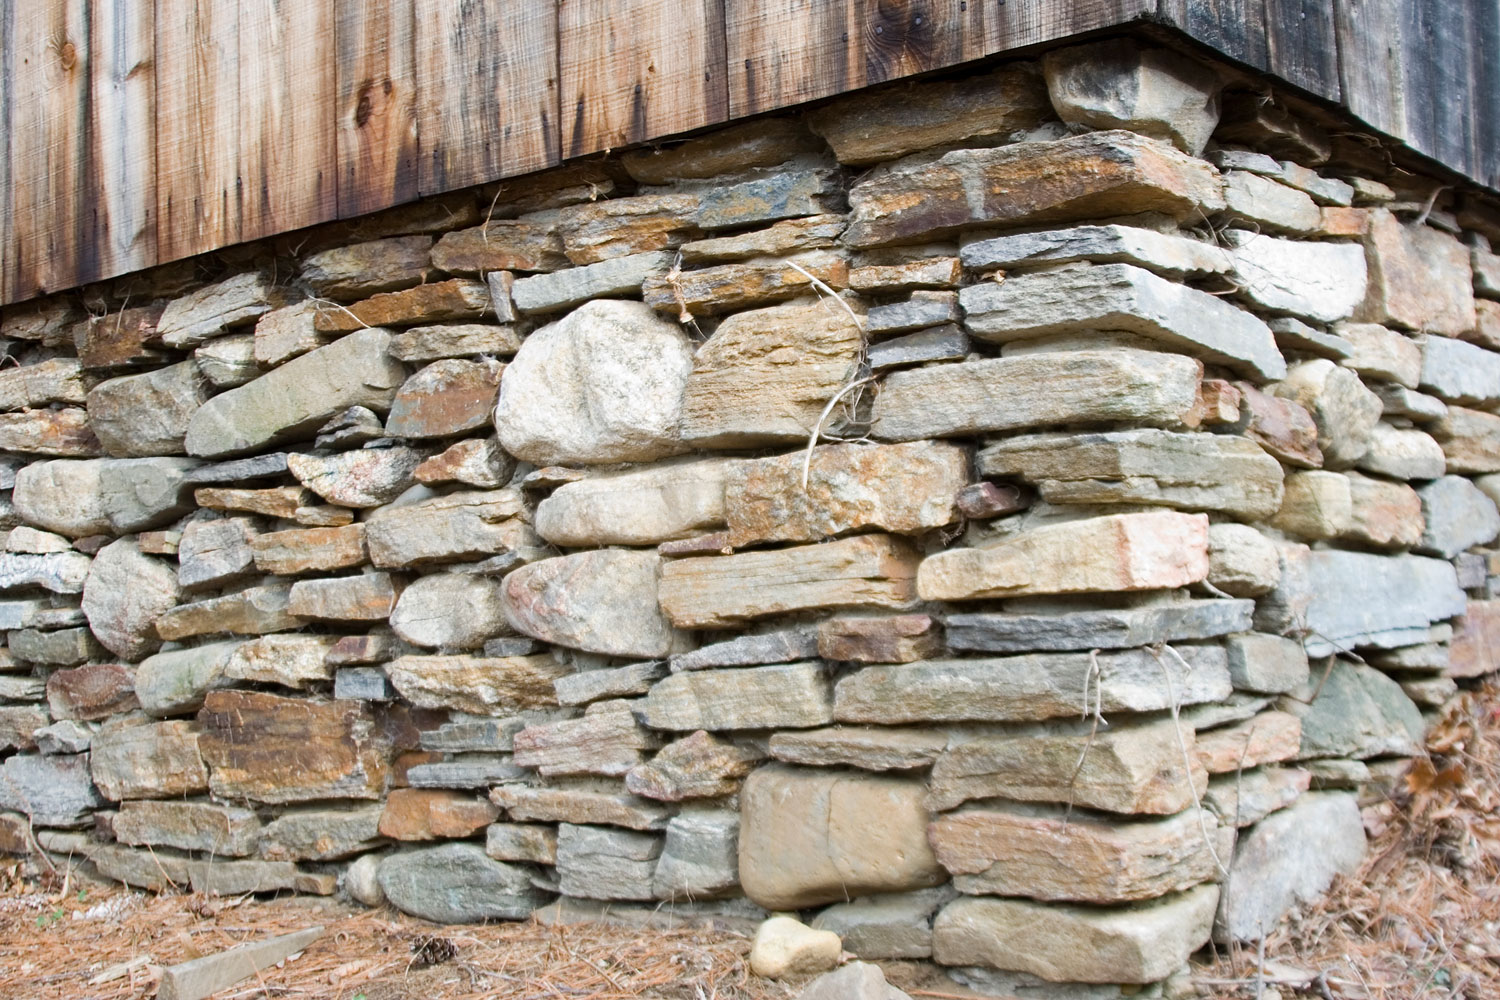 Decorative stone cladding used for covering the house foundation